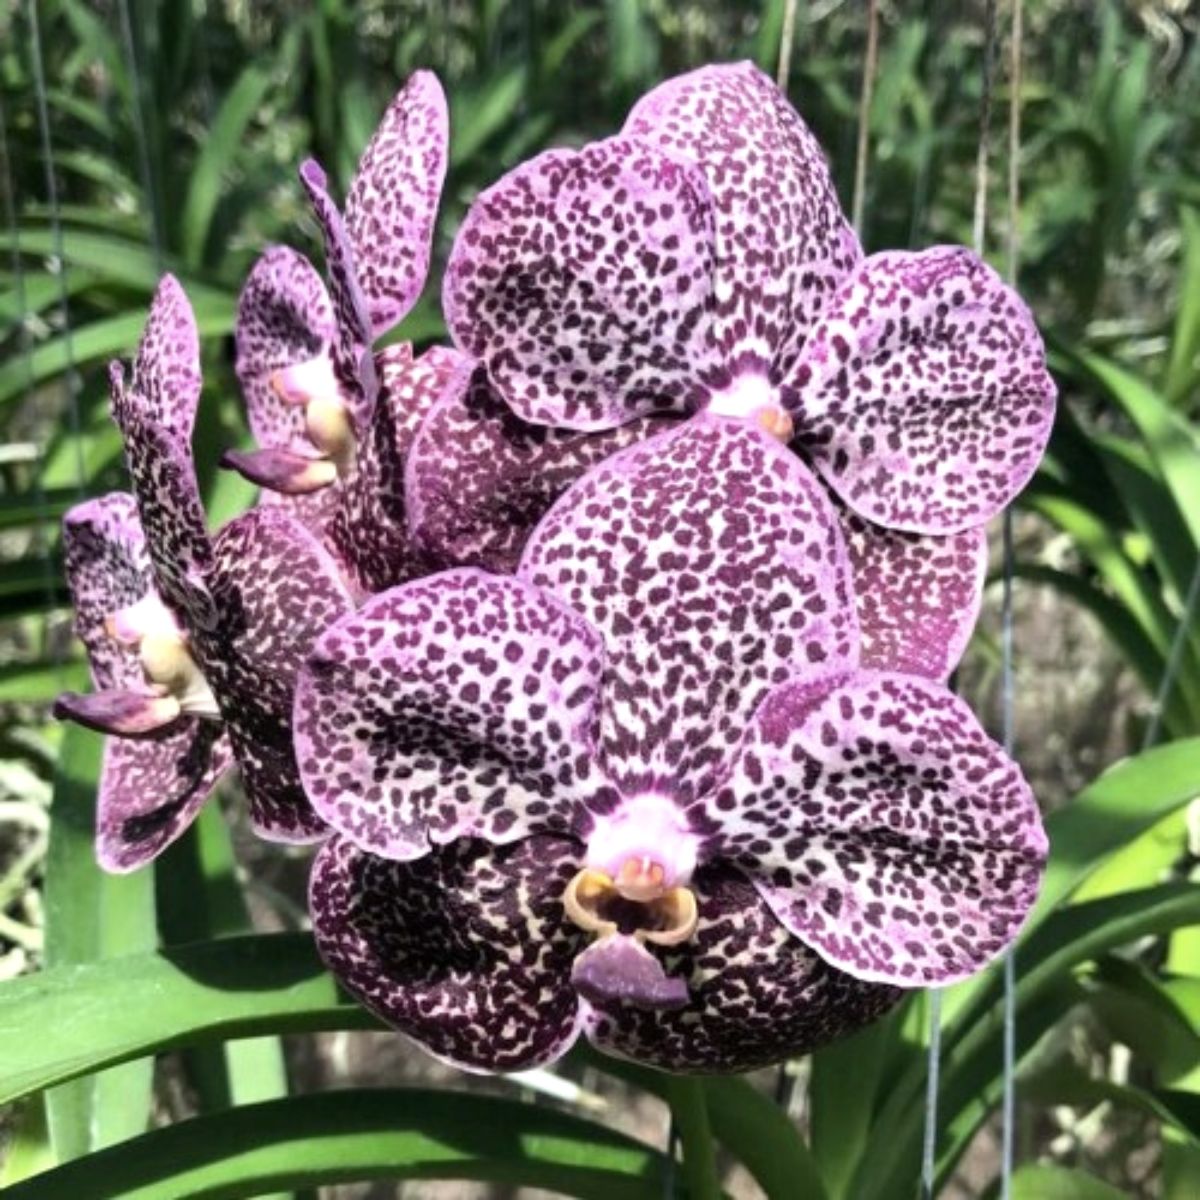 Vanda Kulvadee Fragrance Black Orchid - Striking black orchid with mesmerizing blooms and captivating fragrance